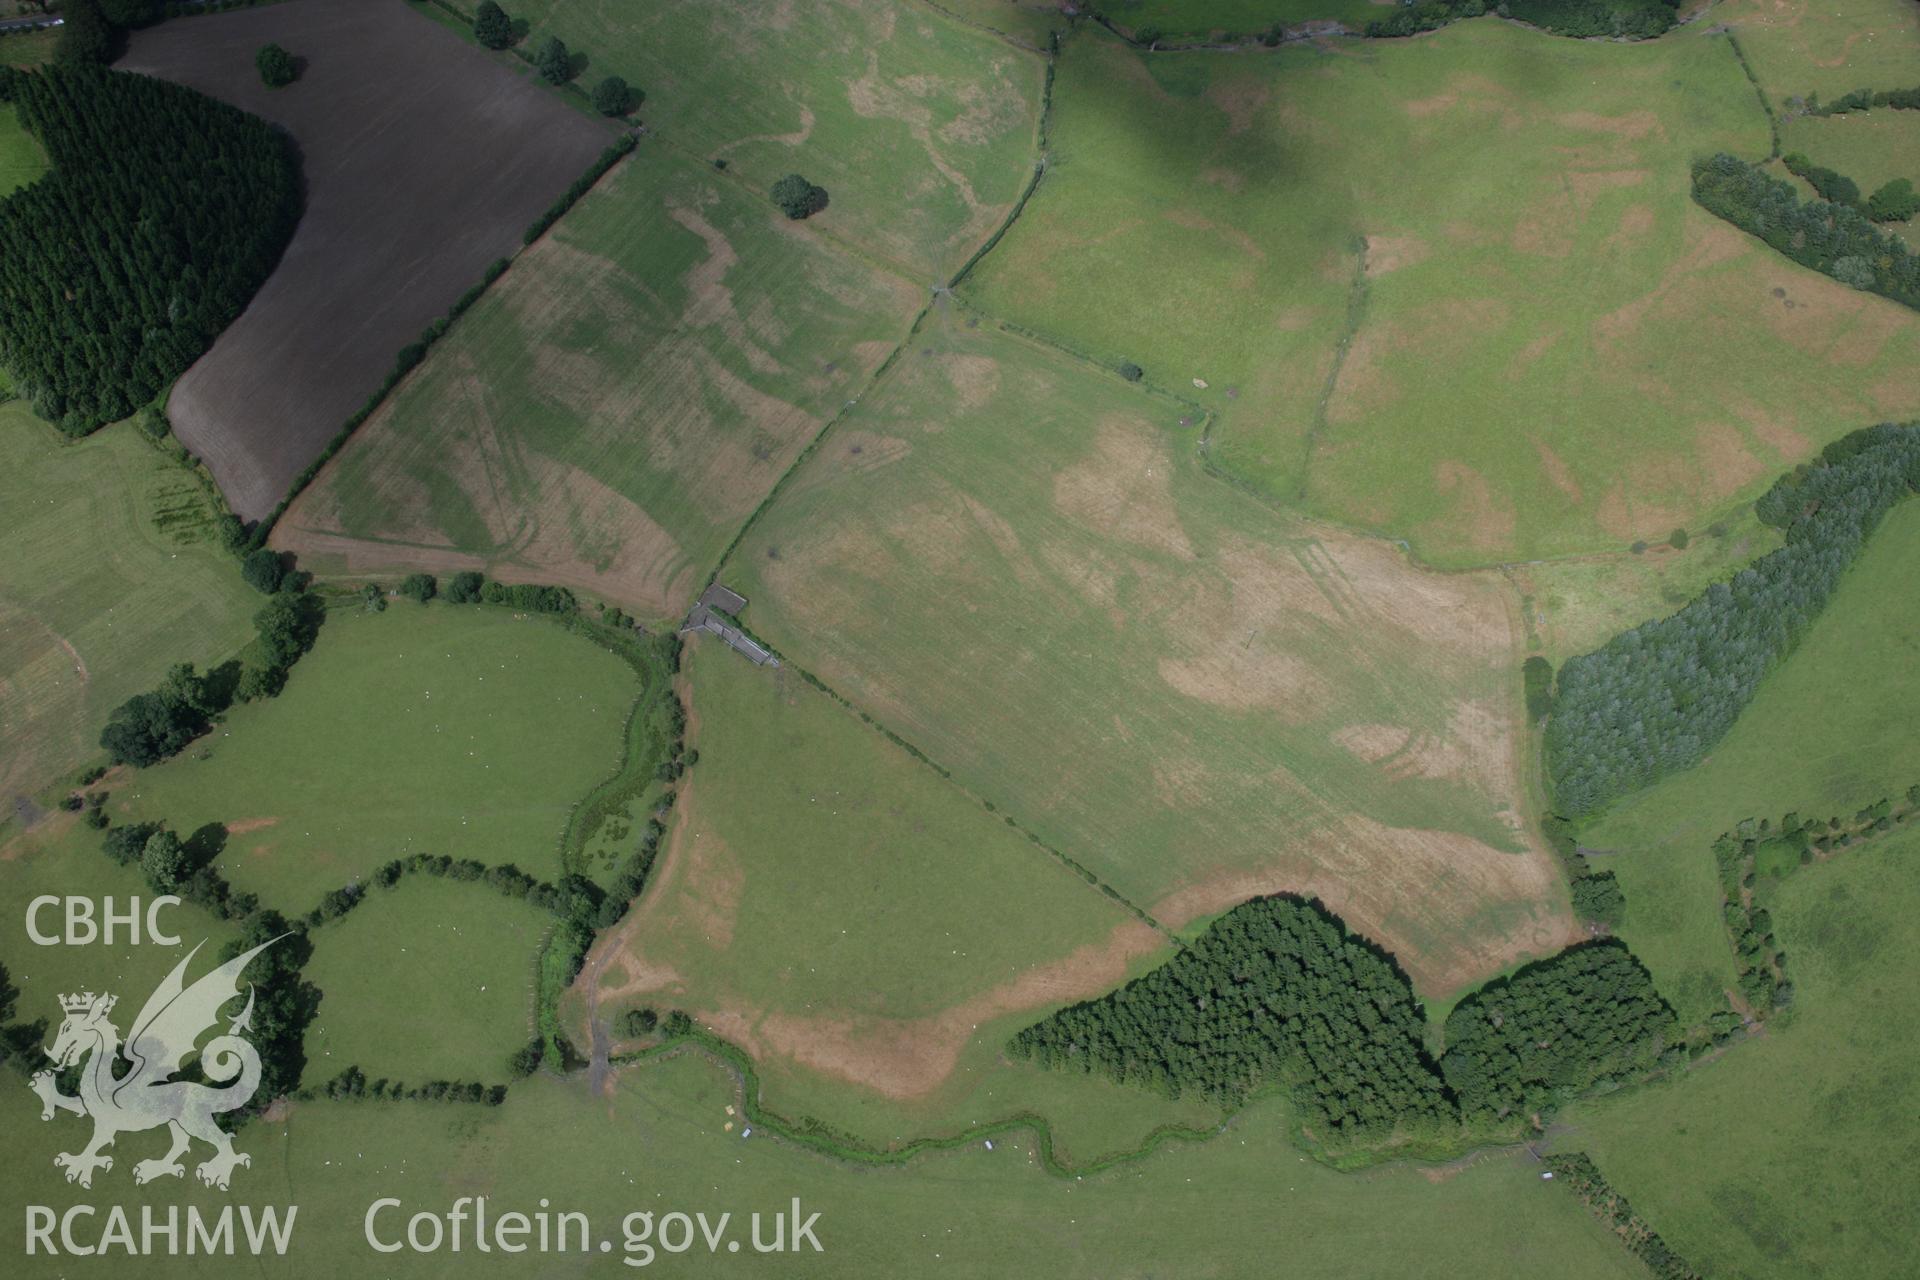 RCAHMW colour oblique aerial photograph of Llanfor Roman Military Complex visible in cropmarks, in general view from the south-west. Taken on 31 July 2006 by Toby Driver.